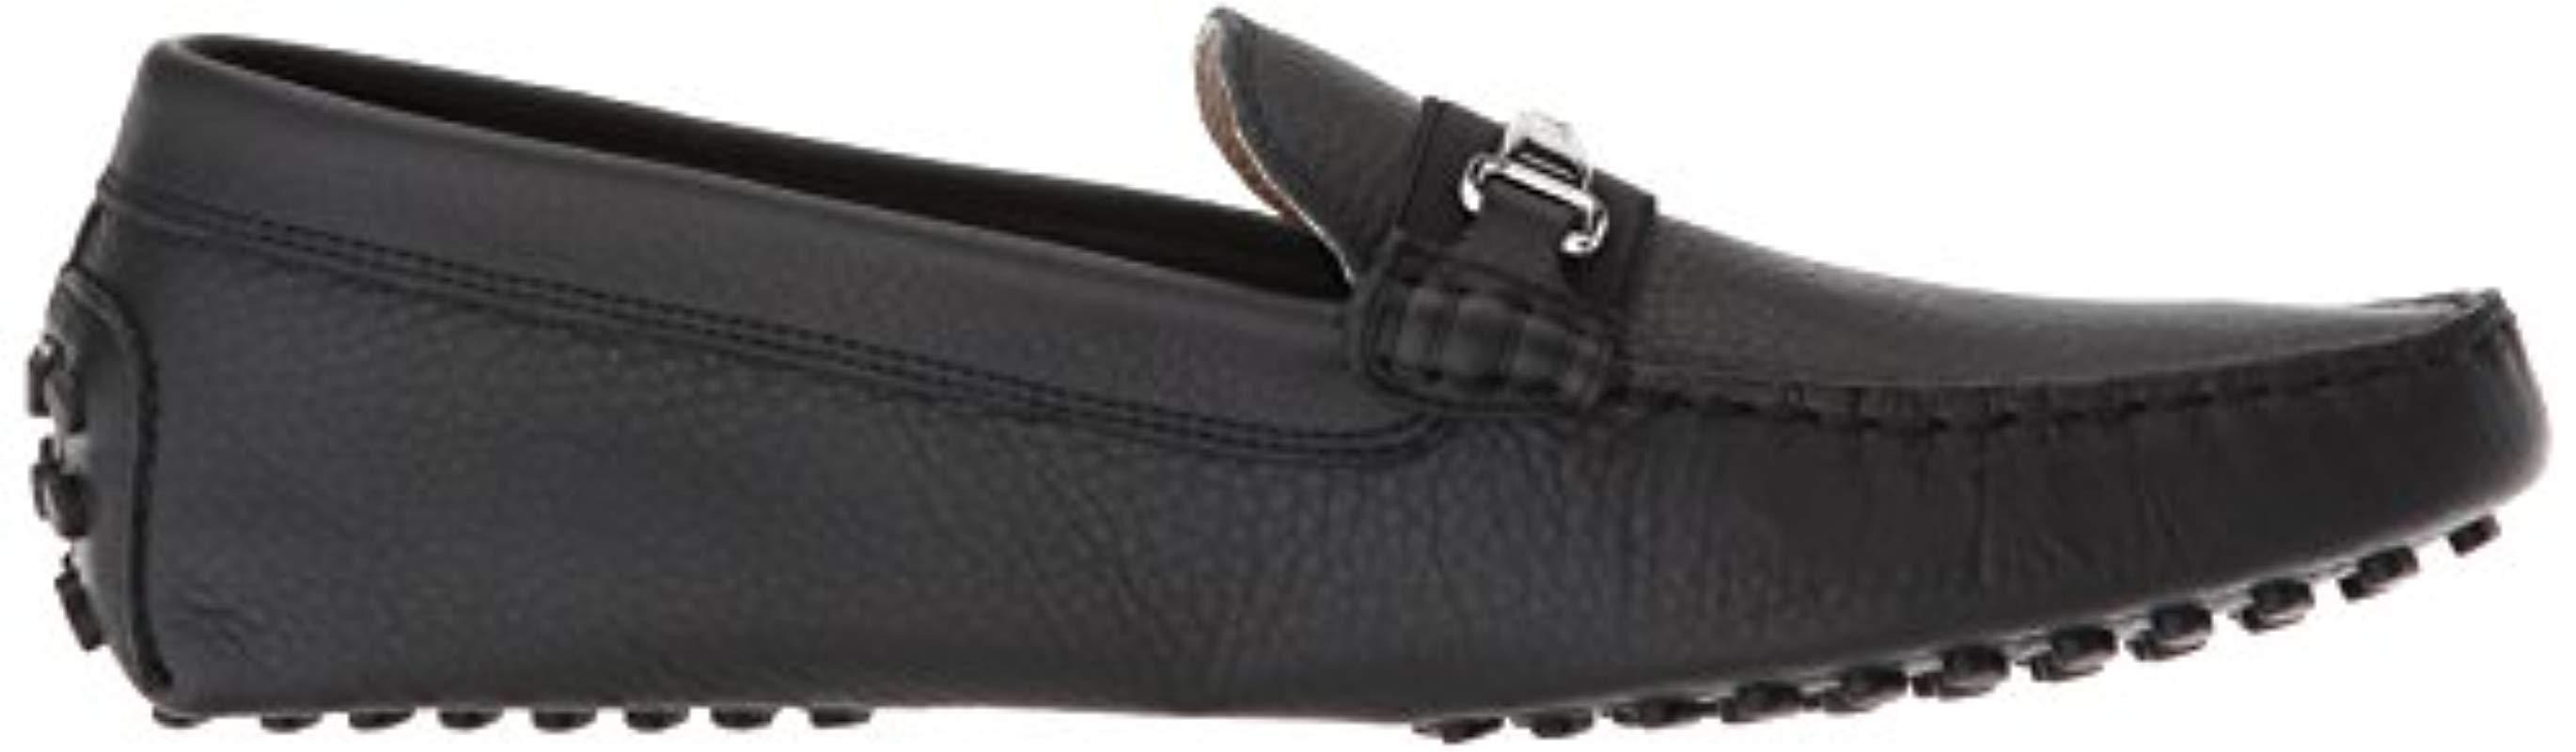 Lacoste Ansted 318 1 U Driving Style Loafer in Black for Men Lyst